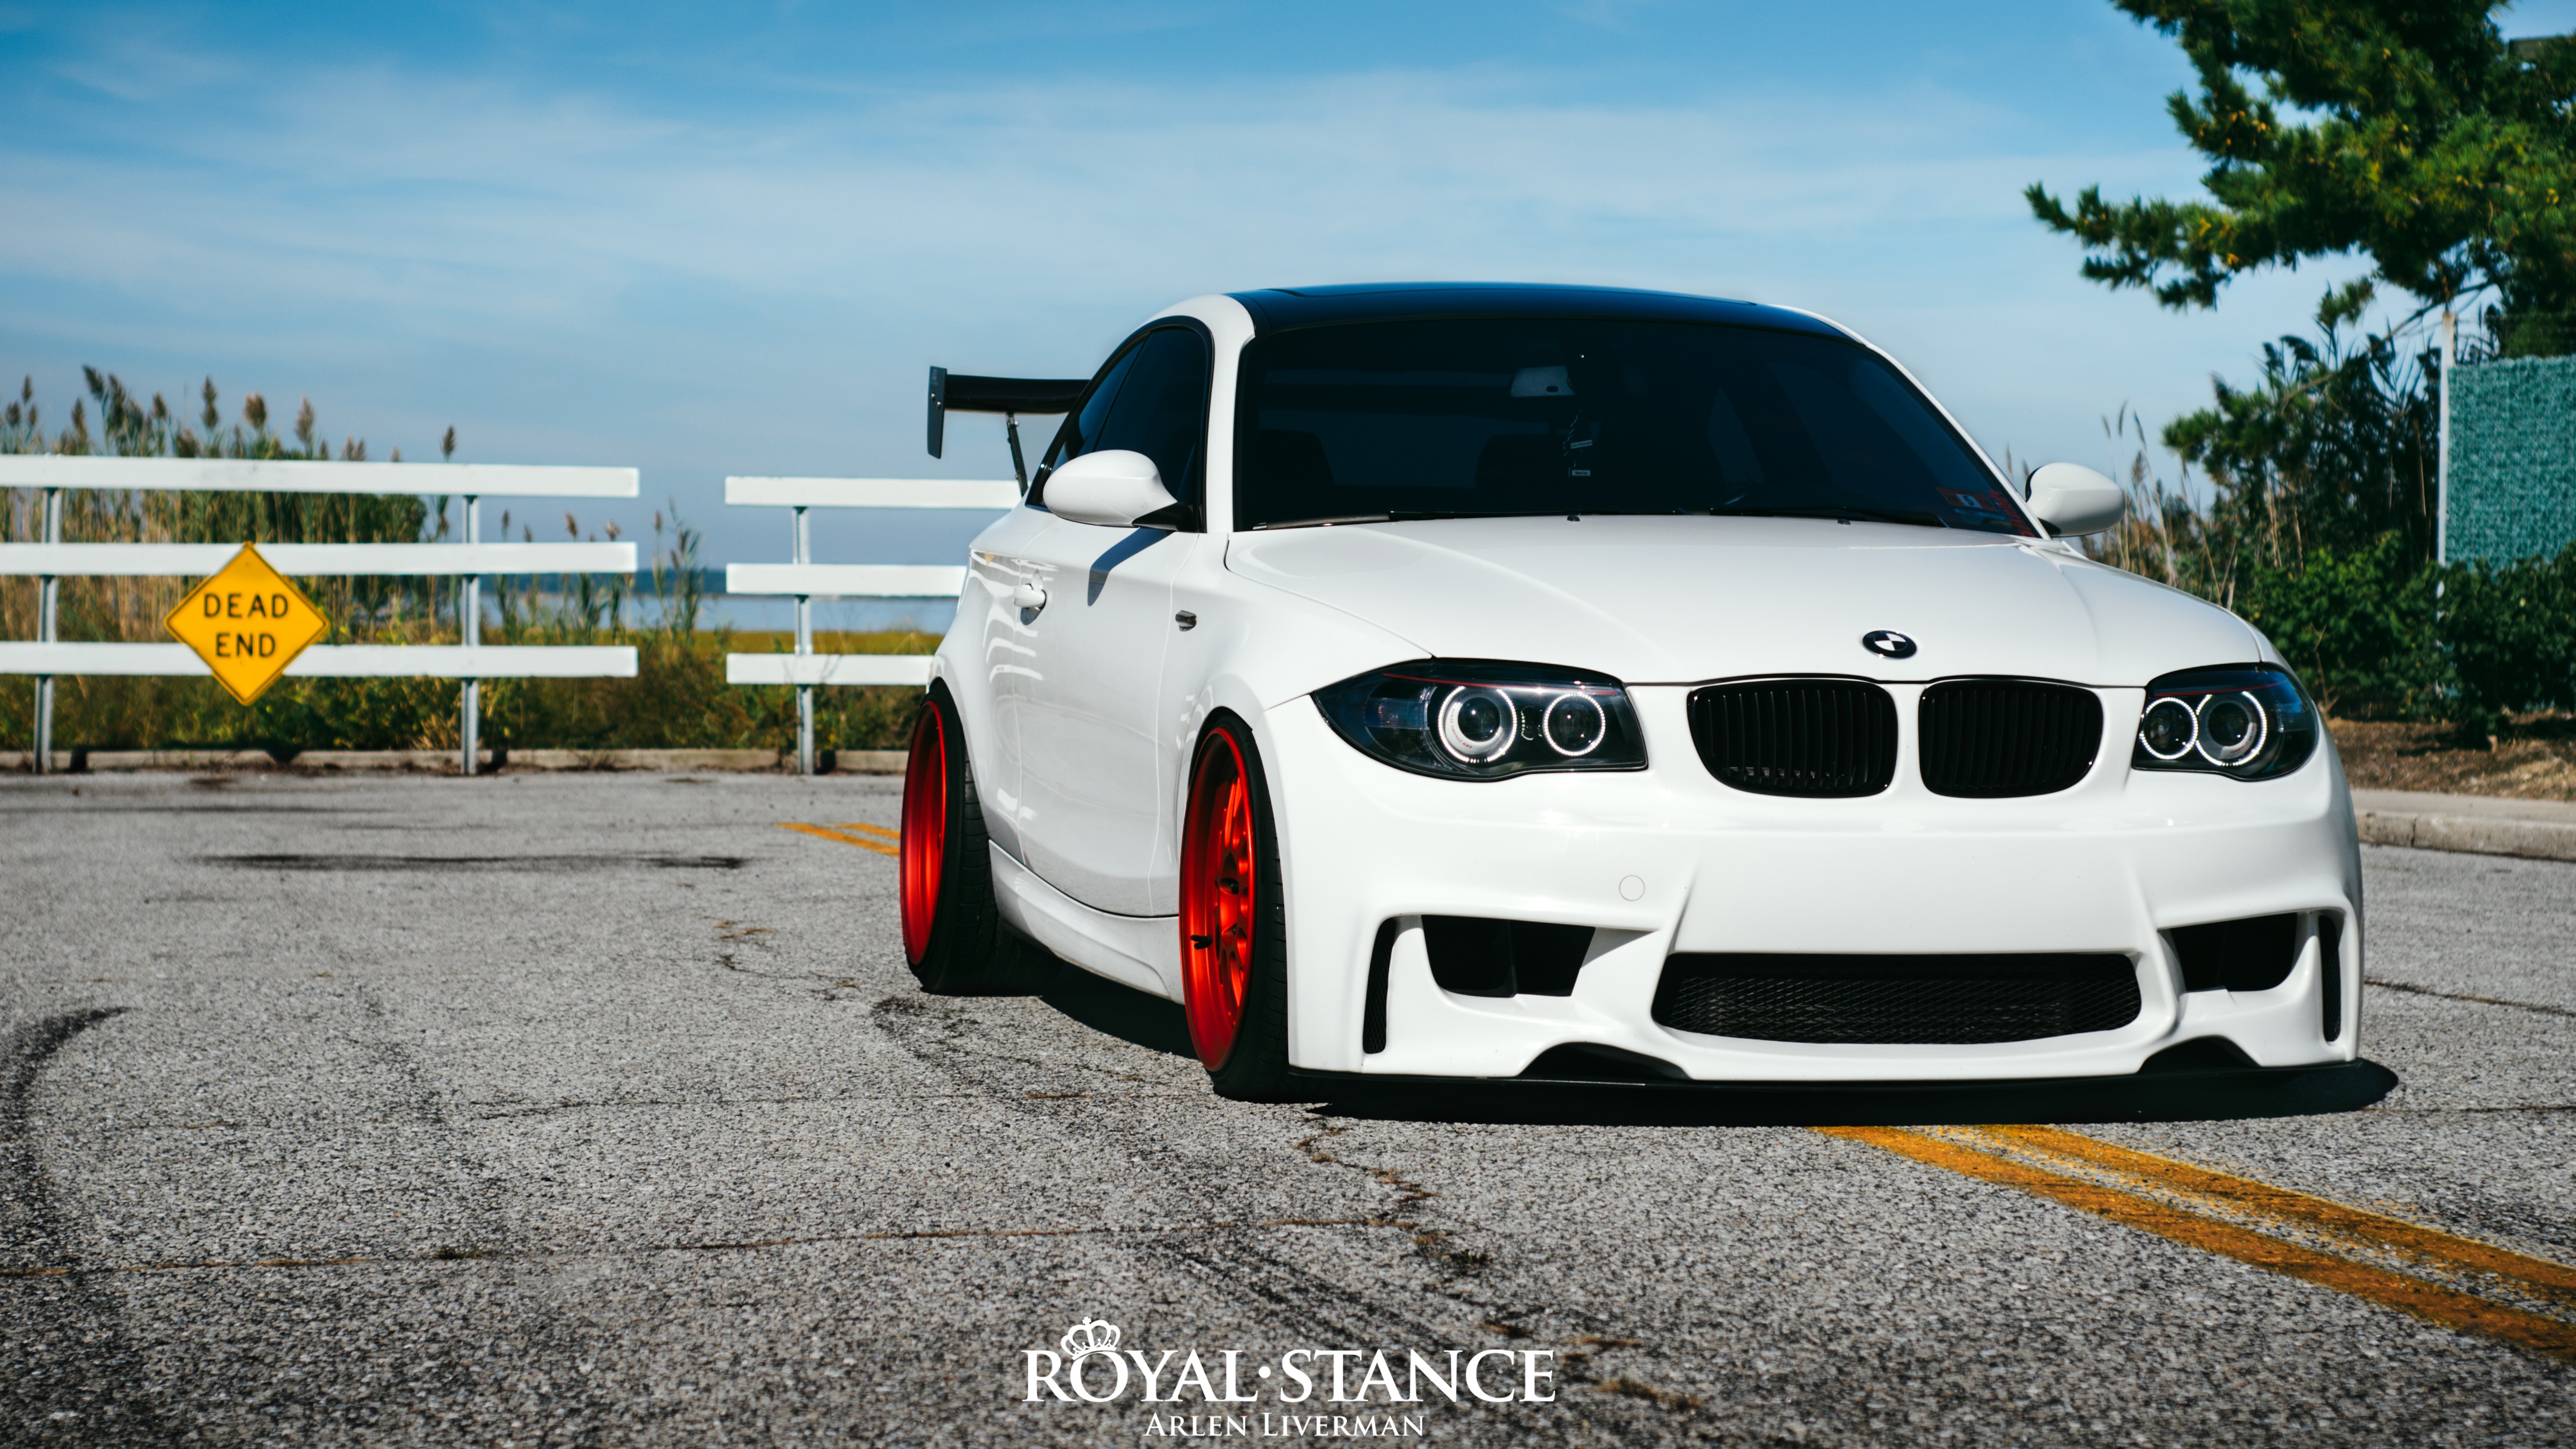 Aftermarket Front Lip on White Lowered BMW 1-Series - Photo by Arlen Liverman